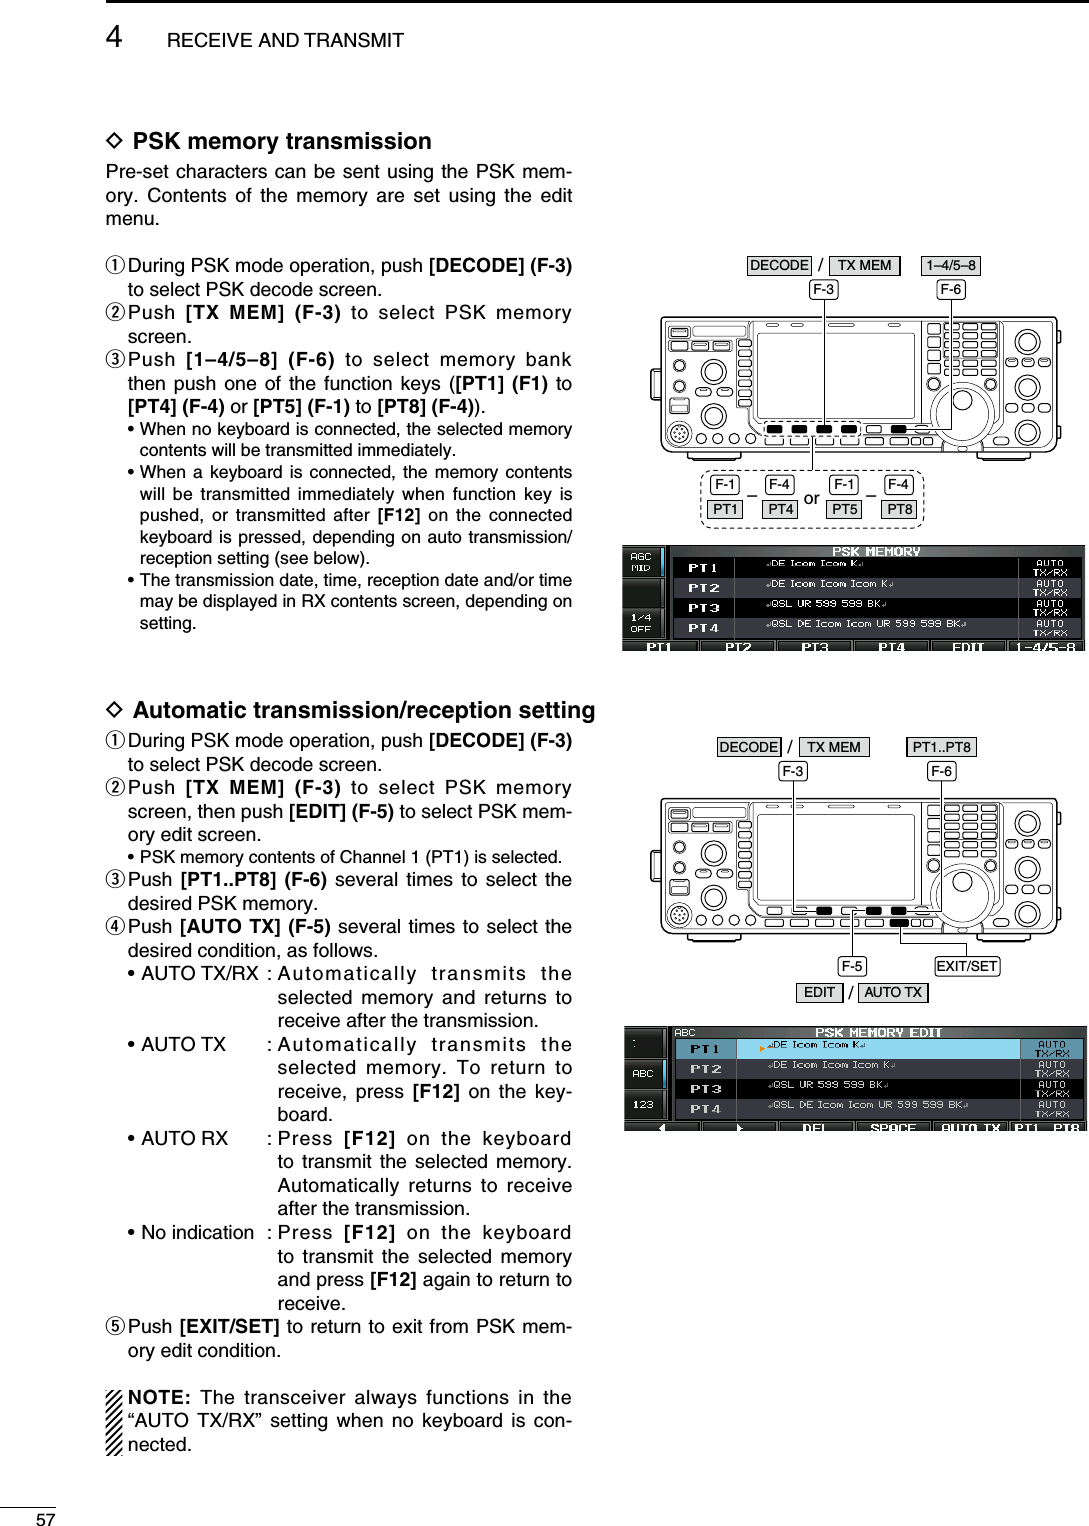 D PSK memory transmissionPre-set characters can be sent using the PSK mem-ory. Contents of the memory are set using the edit menu.q  During PSK mode operation, push [DECODE] (F-3) to select PSK decode screen.w  Push  [TX MEM] (F-3) to select PSK memory screen.e  Push  [1–4/5–8] (F-6) to select memory bank then push one of the function keys ([PT1] (F1) to  [PT4] (F-4) or [PT5] (F-1) to [PT8] (F-4)). •  When no keyboard is connected, the selected memory contents will be transmitted immediately. •  When a keyboard is connected, the memory contents will be transmitted immediately when function key is pushed, or transmitted after [F12] on the connected keyboard is pressed, depending on auto transmission/reception setting (see below). •  The transmission date, time, reception date and/or time may be displayed in RX contents screen, depending on setting.orF-3 F-6–F-1 F-4PT1 PT4 –F-1 F-4PT5 PT8/DECODE TX MEM 1–4/5–8D Automatic transmission/reception settingq  During PSK mode operation, push [DECODE] (F-3) to select PSK decode screen.w  Push  [TX MEM] (F-3) to select PSK memory screen, then push [EDIT] (F-5) to select PSK mem-ory edit screen.  • PSK memory contents of Channel 1 (PT1) is selected.e  Push  [PT1..PT8] (F-6) several times to select the desired PSK memory.r  Push [AUTO TX] (F-5) several times to select the desired condition, as follows.  • AUTO TX/RX :  Automatically transmits the selected memory and returns to receive after the transmission.  • AUTO TX  :  Automatically transmits the selected memory. To return to receive, press [F12] on the key-board.  • AUTO RX  :  Press  [F12] on the keyboard to transmit the selected memory. Automatically returns to receive after the transmission.  • No indication  :  Press  [F12] on the keyboard to transmit the selected memory and press [F12] again to return to receive.t  Push [EXIT/SET] to return to exit from PSK mem-ory edit condition. NOTE:  The transceiver always functions in the “AUTO TX/RX” setting when no keyboard is con-nected.EXIT/SETF-3 F-6F-5/DECODE TX MEMAUTO TXEDIT /PT1..PT8574RECEIVE AND TRANSMIT